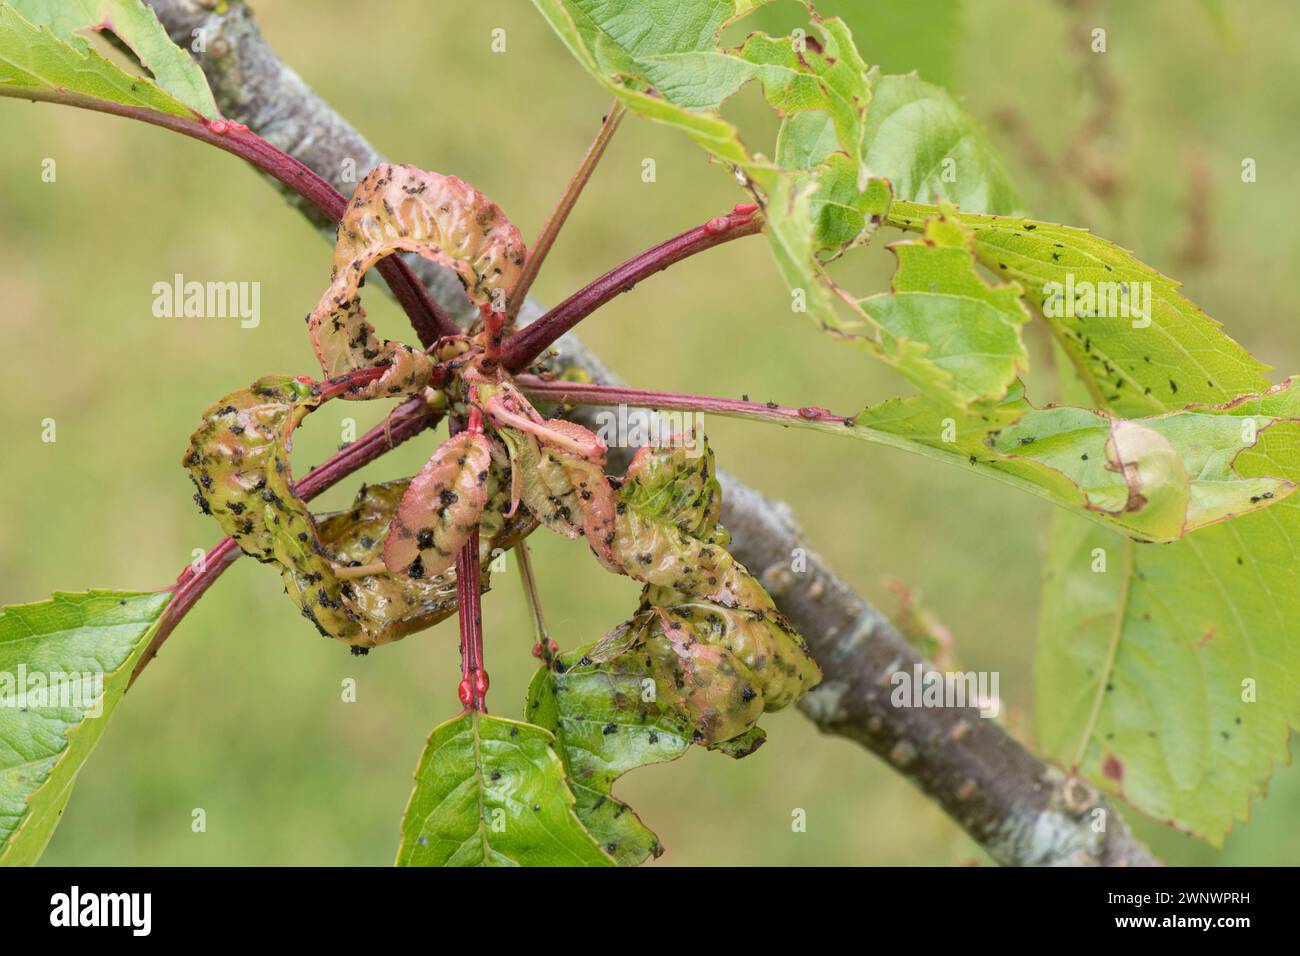 Black cherry aphid (Myzus cerasi) colony causing distortion to the young leaves of a cherry tree (Prunus avium), Berkshire, June Stock Photo